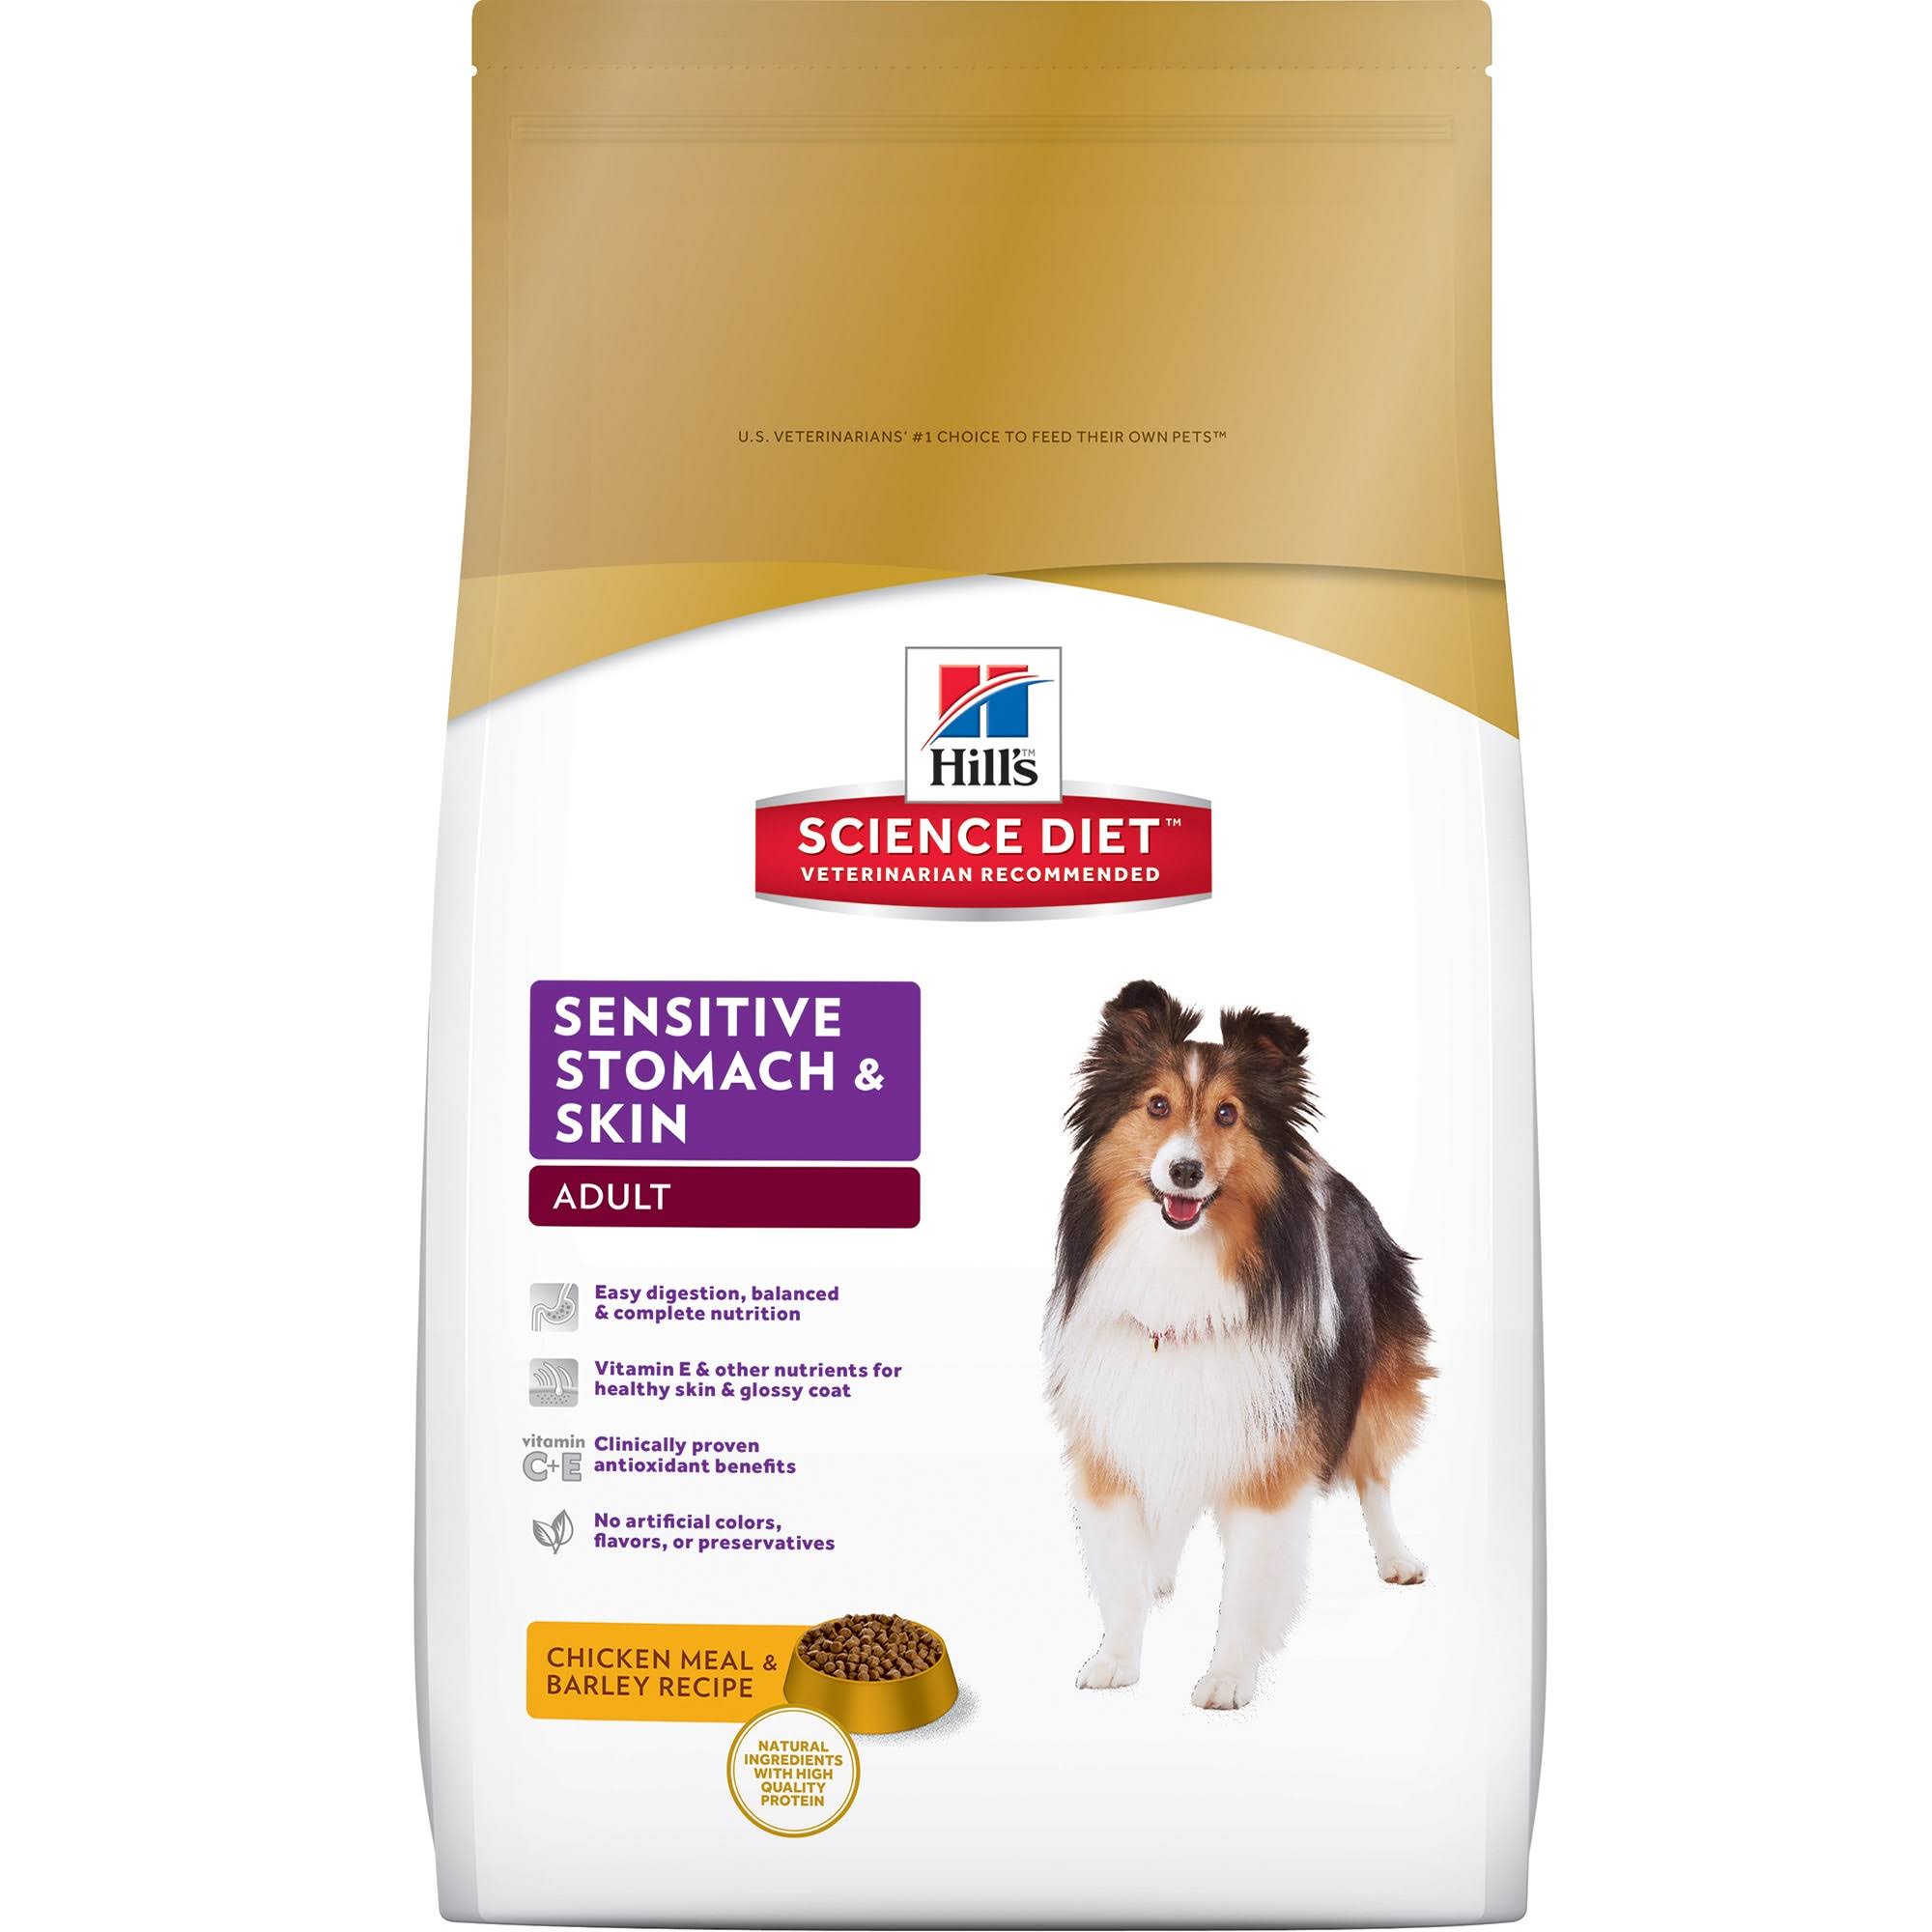 Hill's Science Diet Adult Sensitive Stomach and Skin Dry Dog Food - Chicken Meal and Barley Recipe, 30lbs